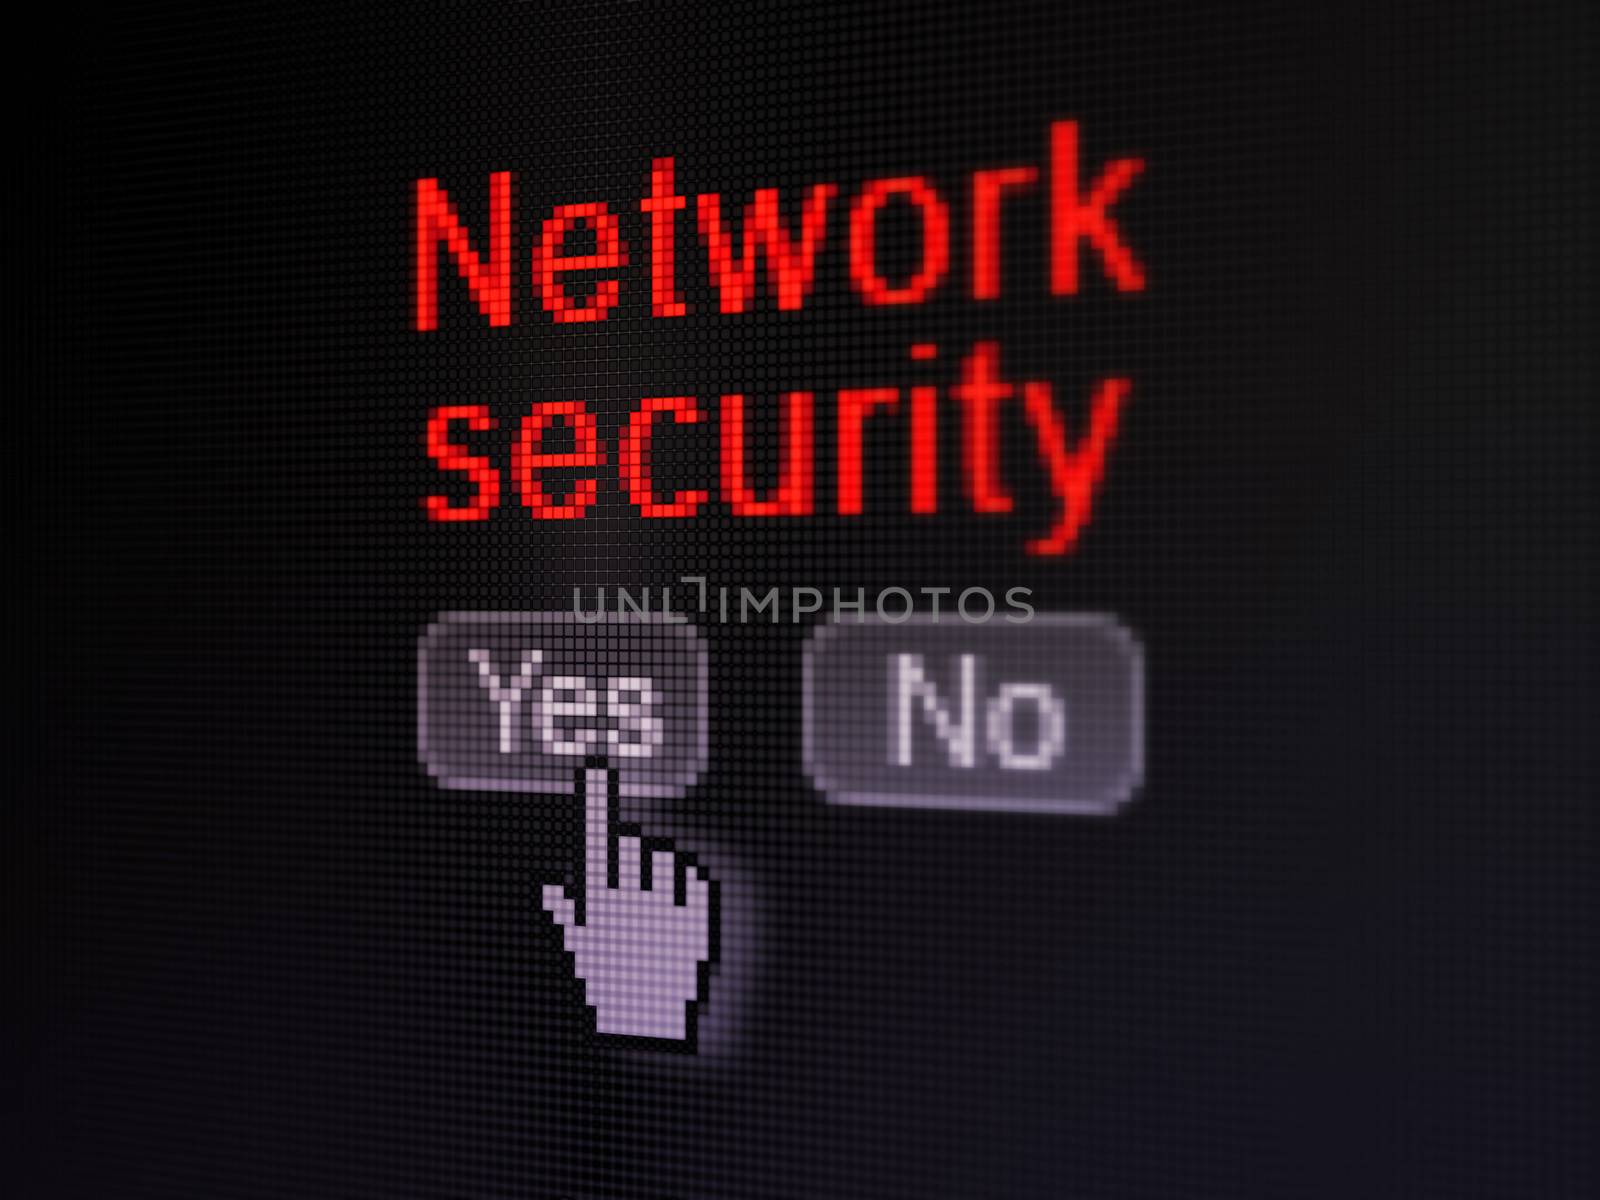 Protection concept: Network Security on digital computer screen by maxkabakov